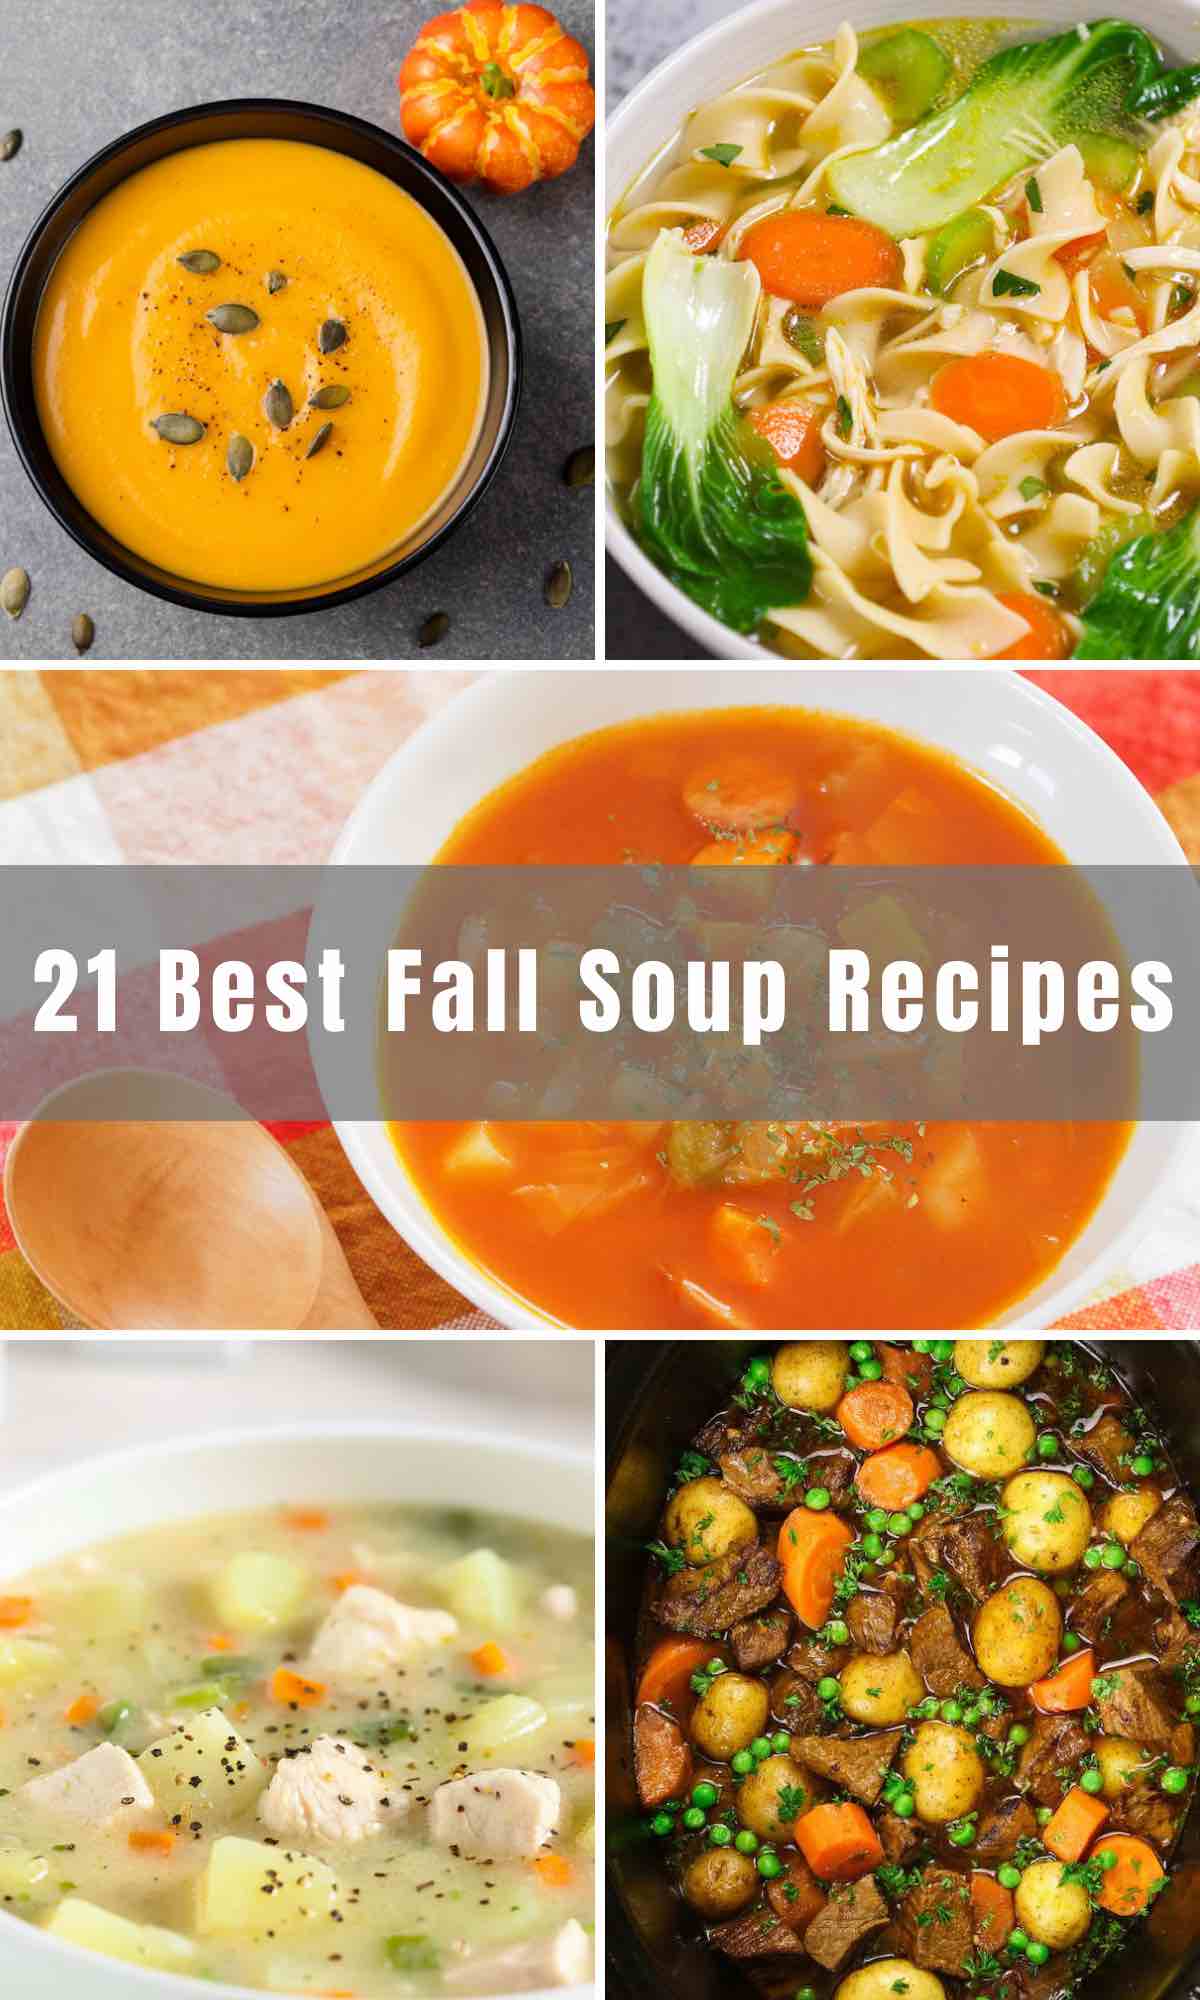 We are excited to bring you 21 of the best Fall Soup Recipes that are delicious, cozy, and comforting. From pumpkin soup to chicken noodle soup and beef stew, get cooking and enjoy these warm and flavorful soup recipes!